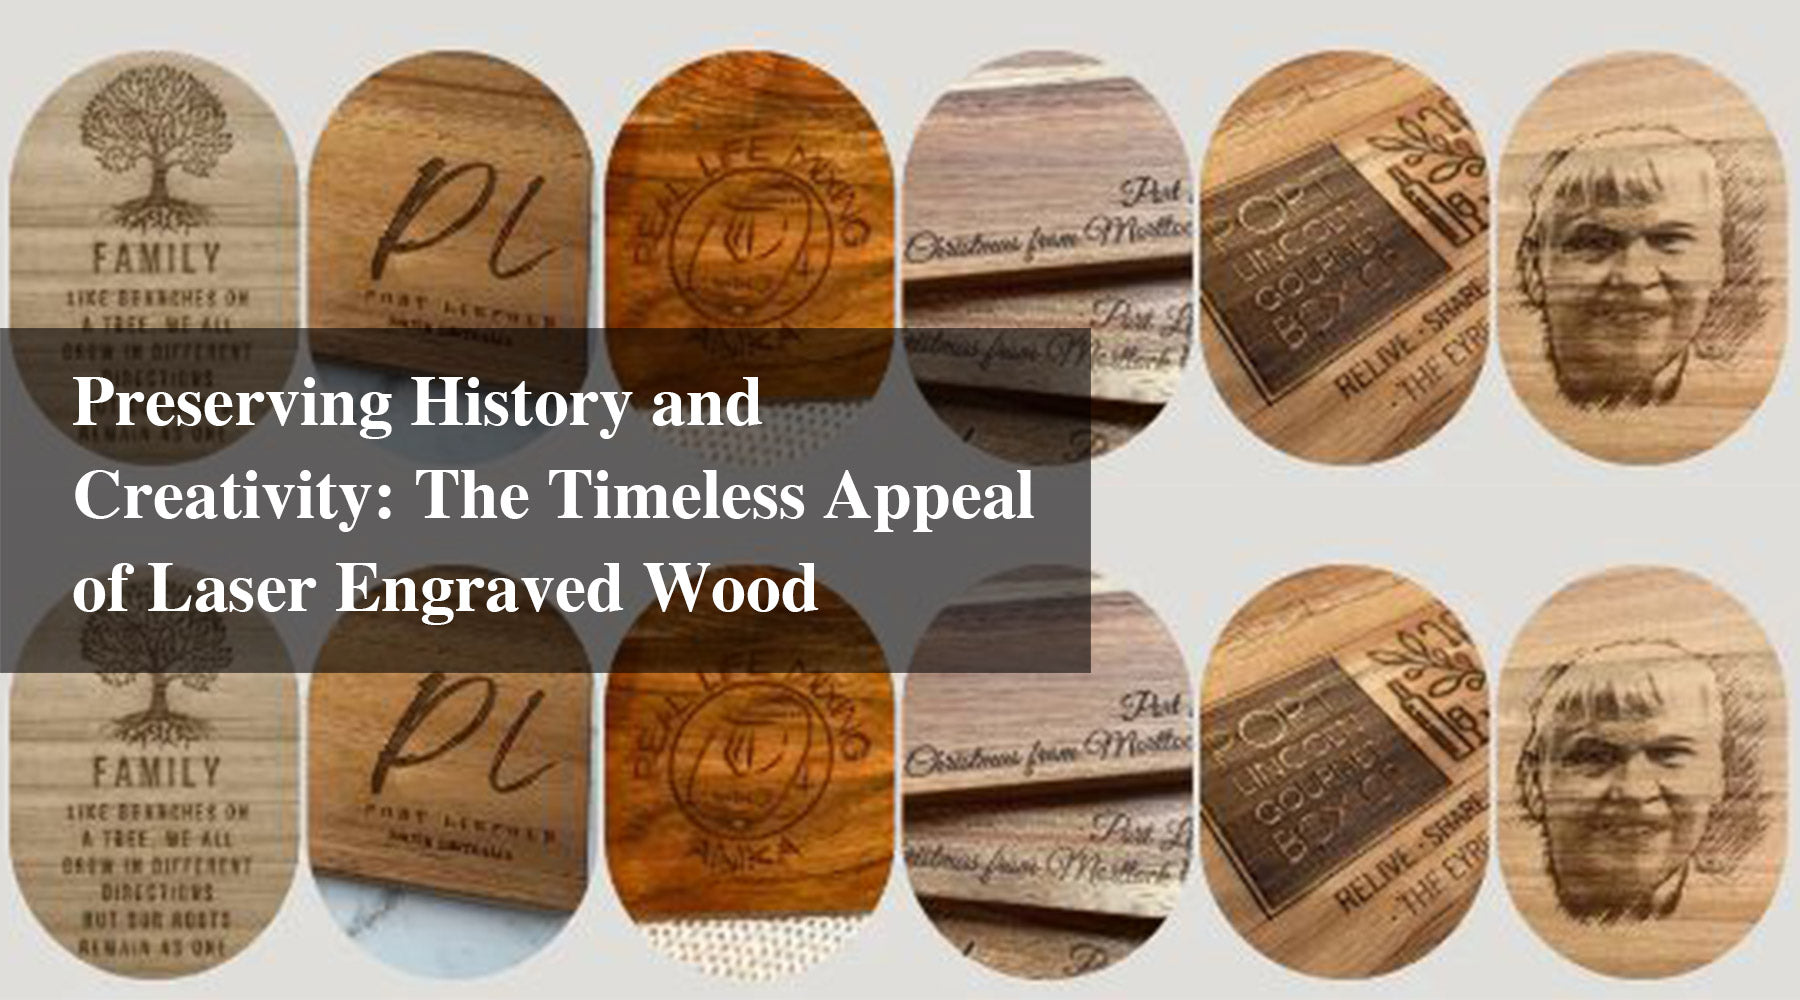 Preserving History and Creativity: The Timeless Appeal of Laser Engraved Wood